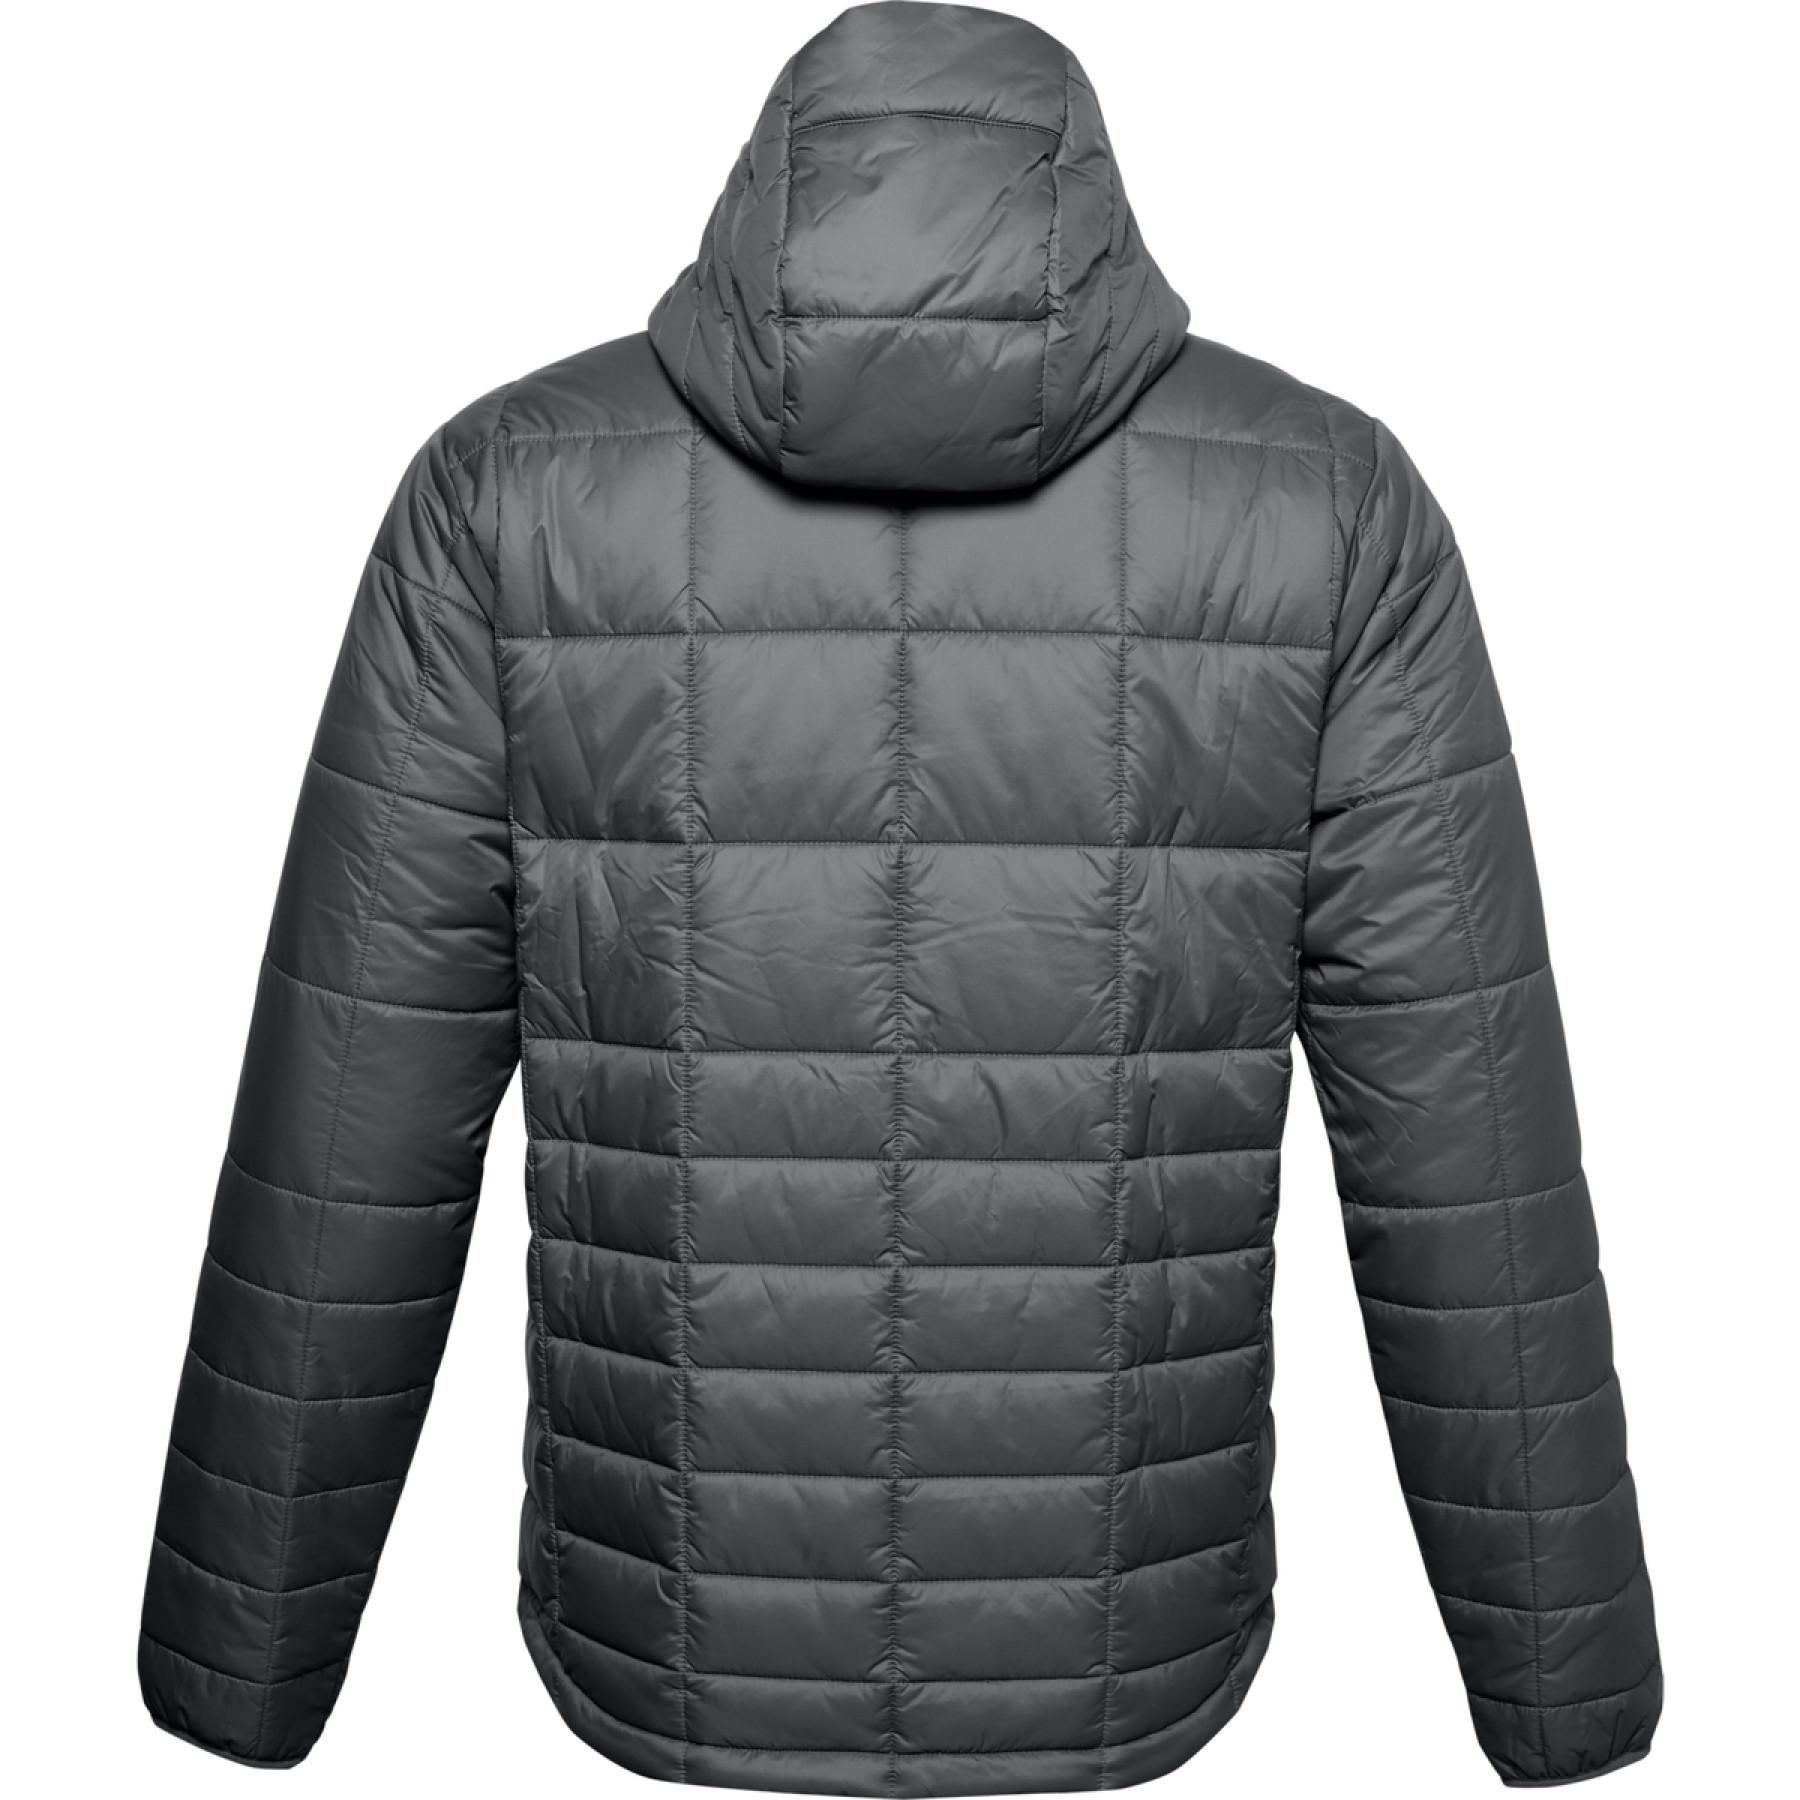 Jacket Under Armour à capuche Insulated